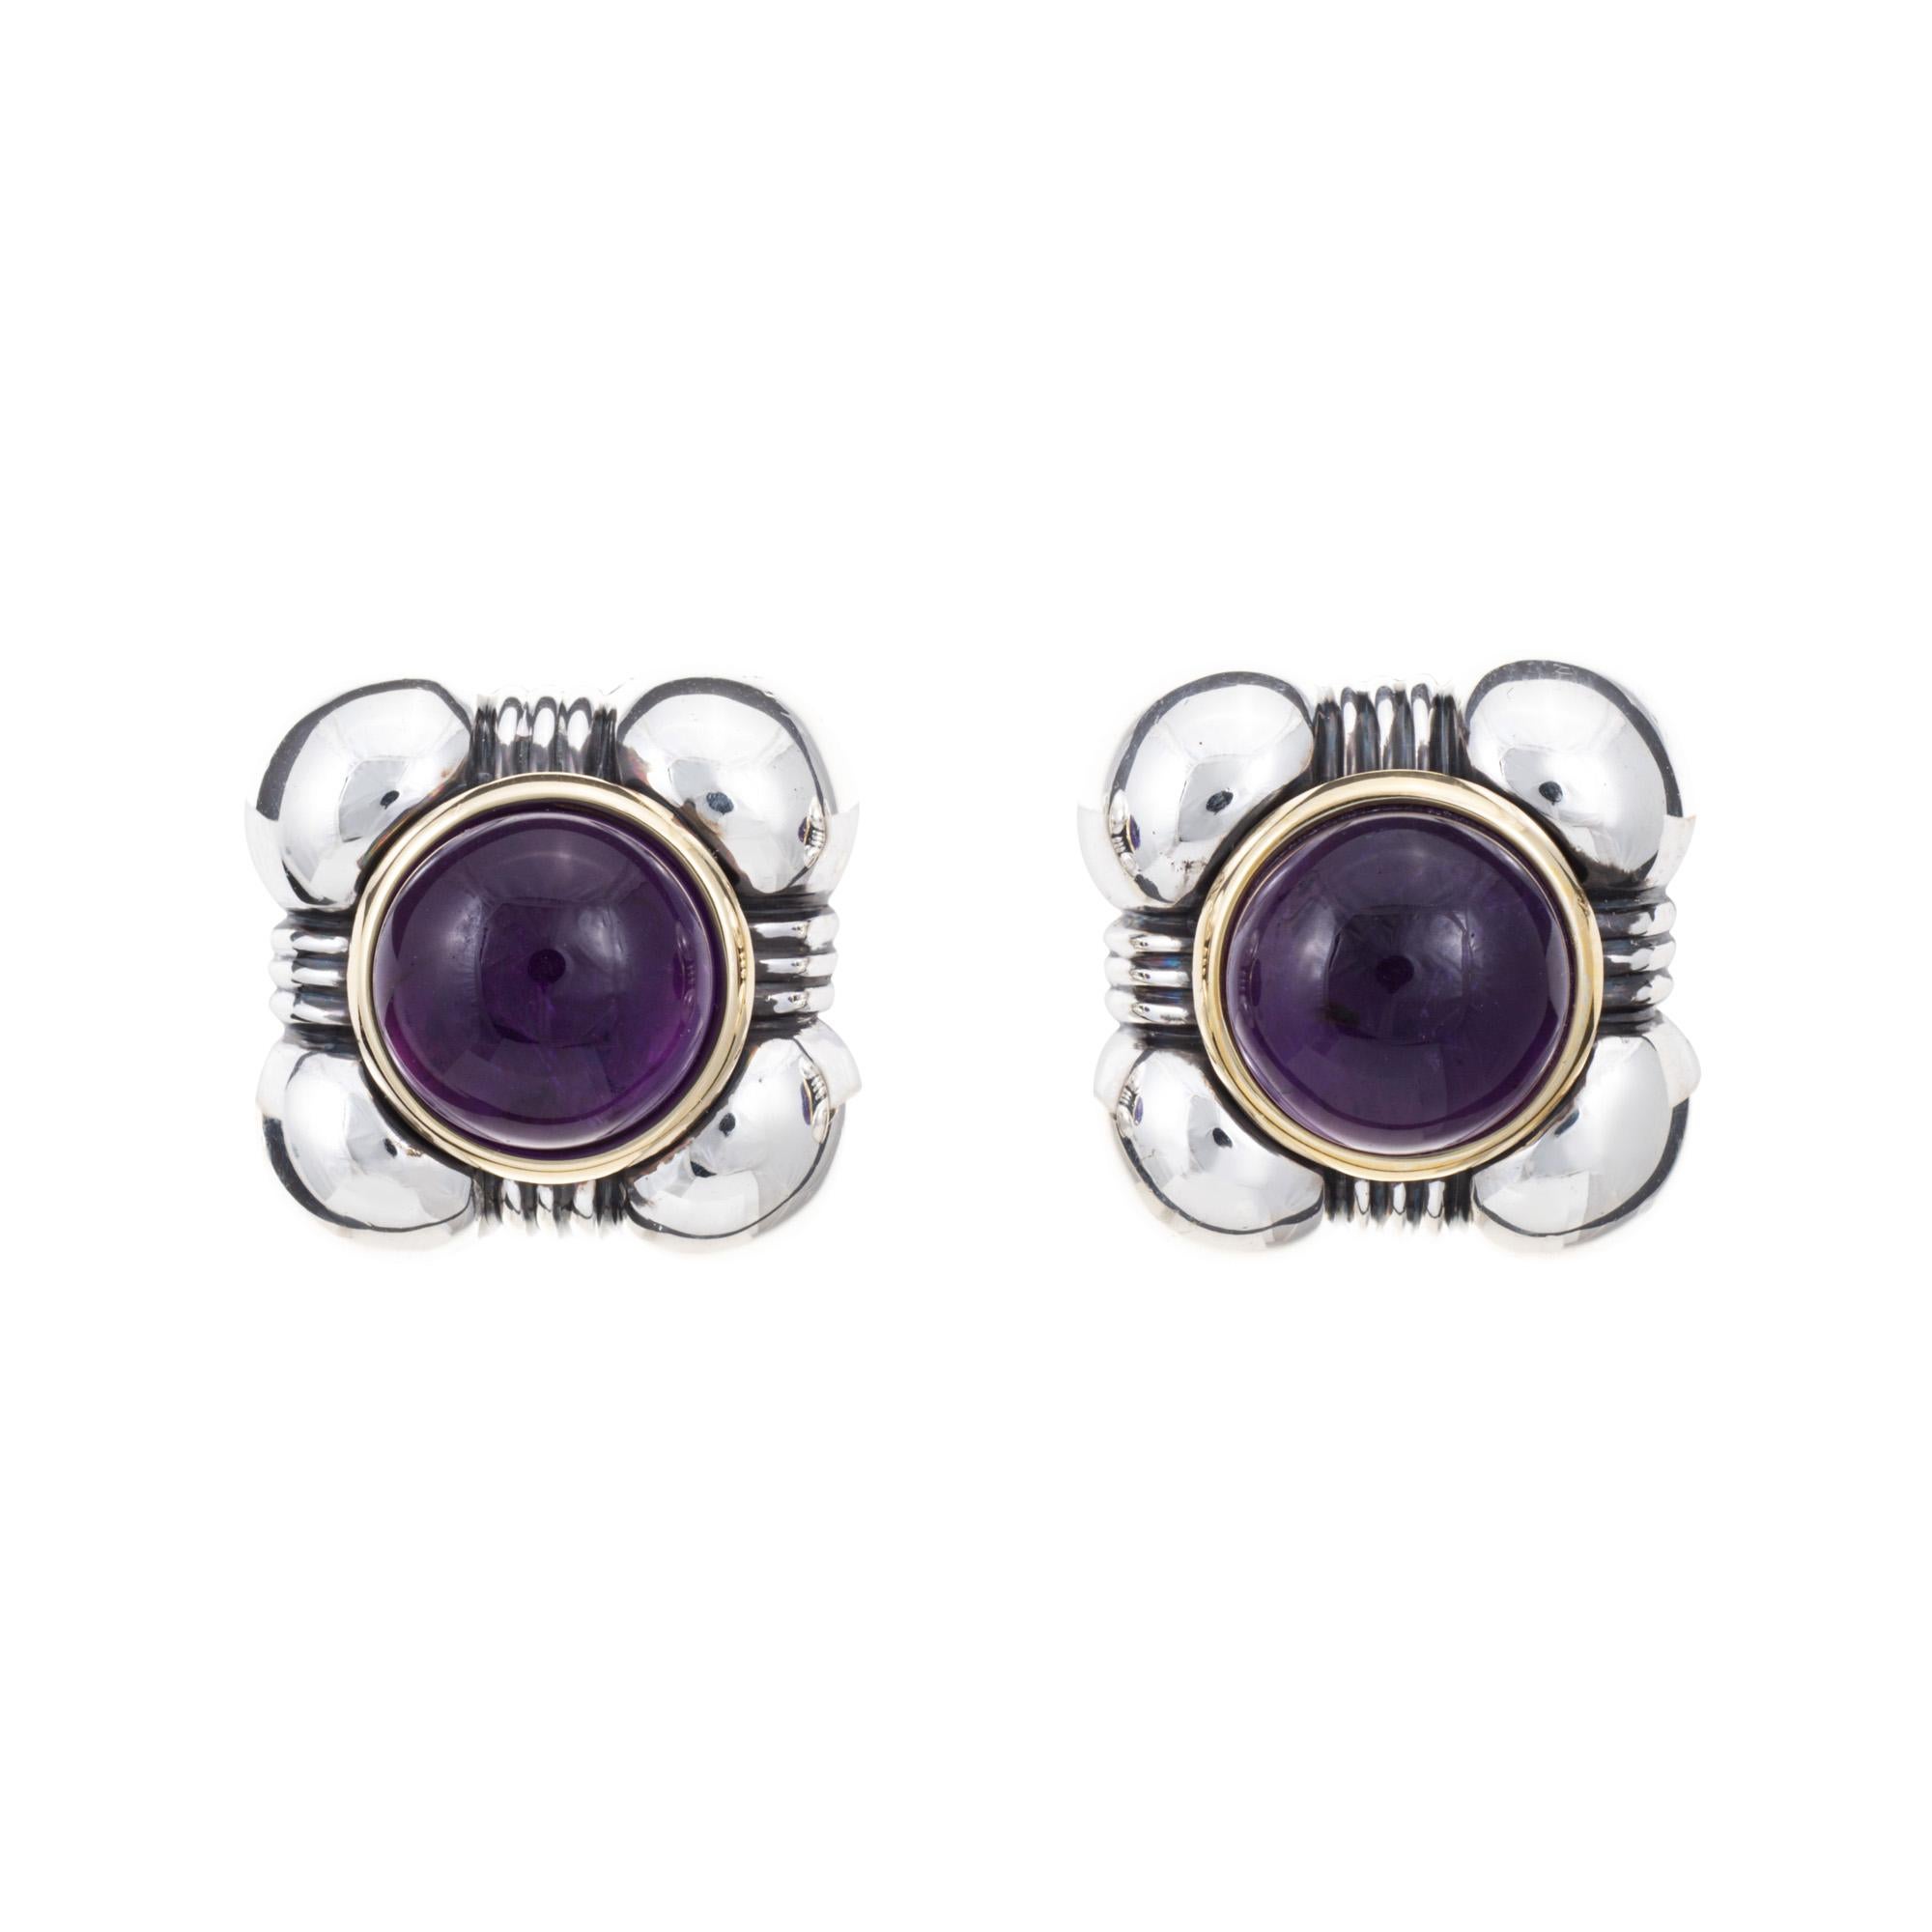 Cabochon Vintage Tiffany & Co Amethyst Earrings Square Sterling Silver 18k Gold Clip on